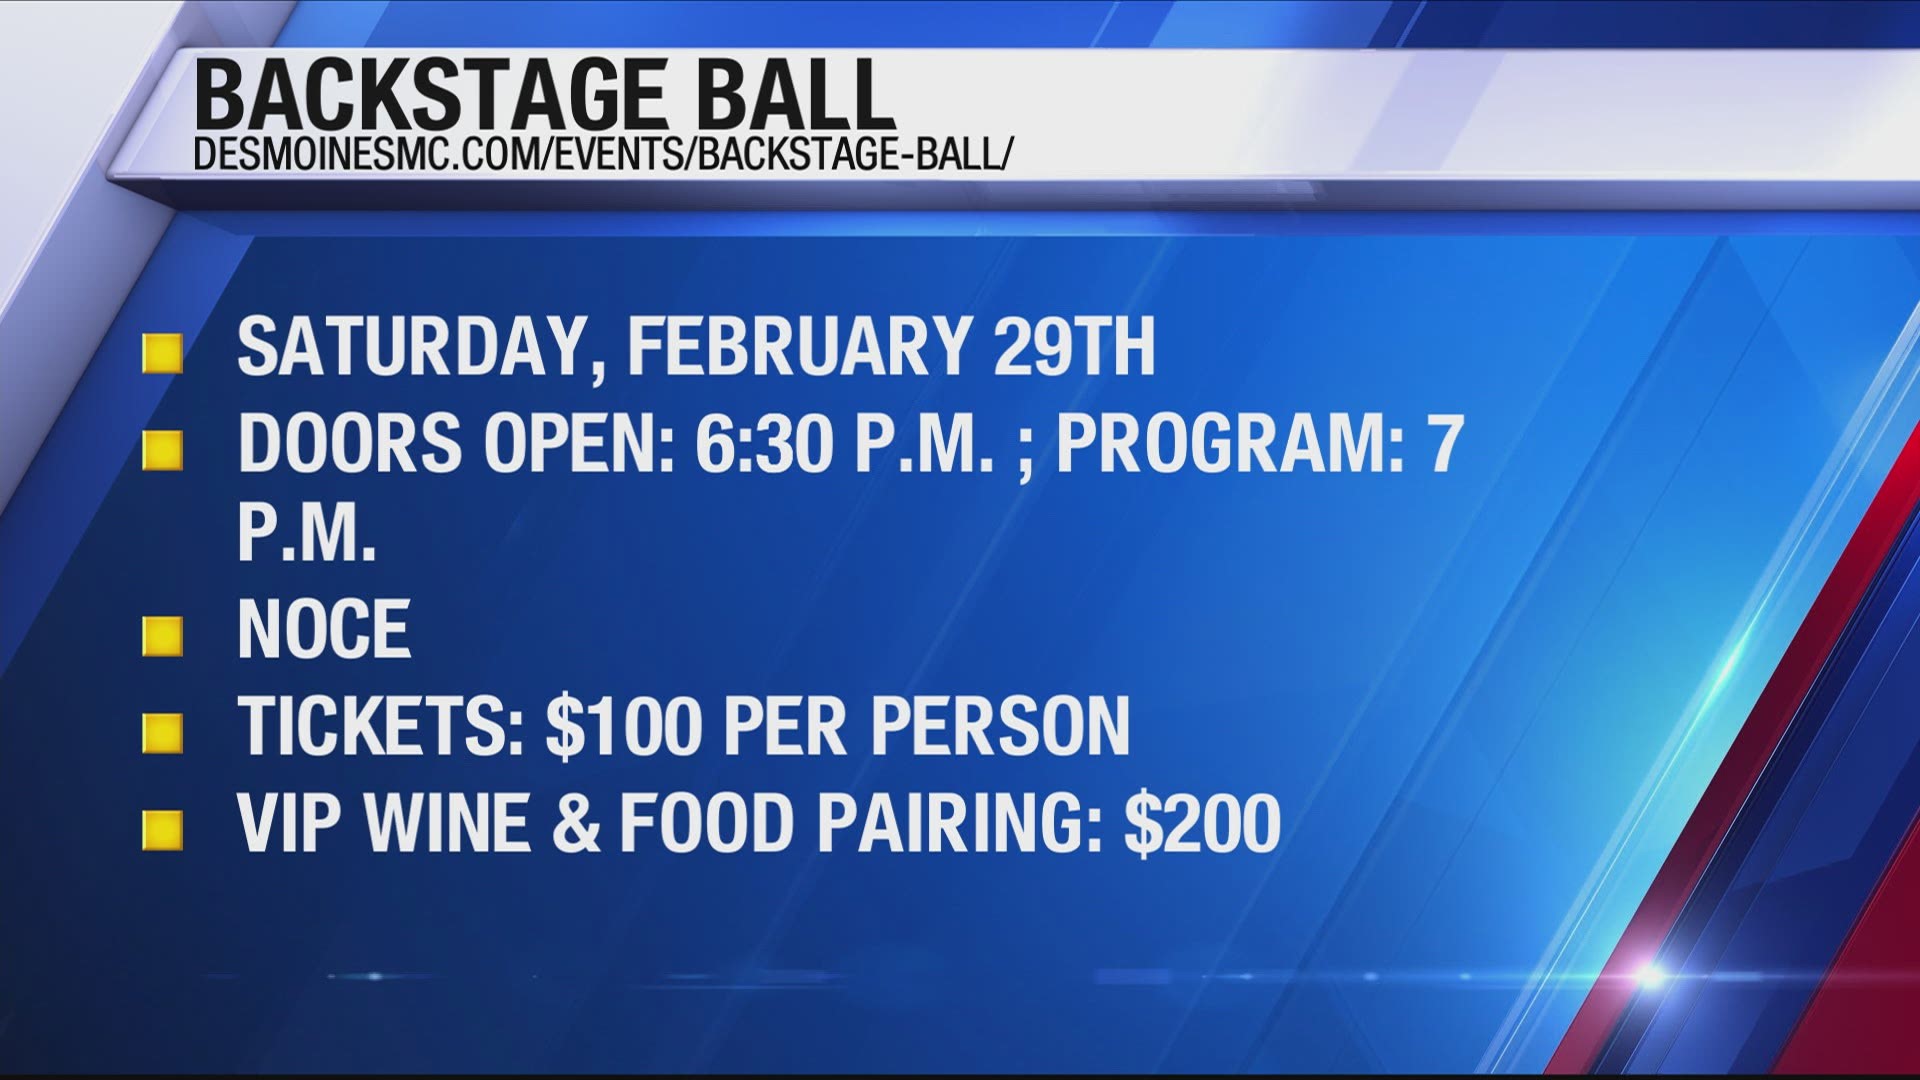 This weekend, you can enjoy a night of music and wine while helping support the Greater Des Moines Music Coalition at the 11th Annual Backstage Ball.